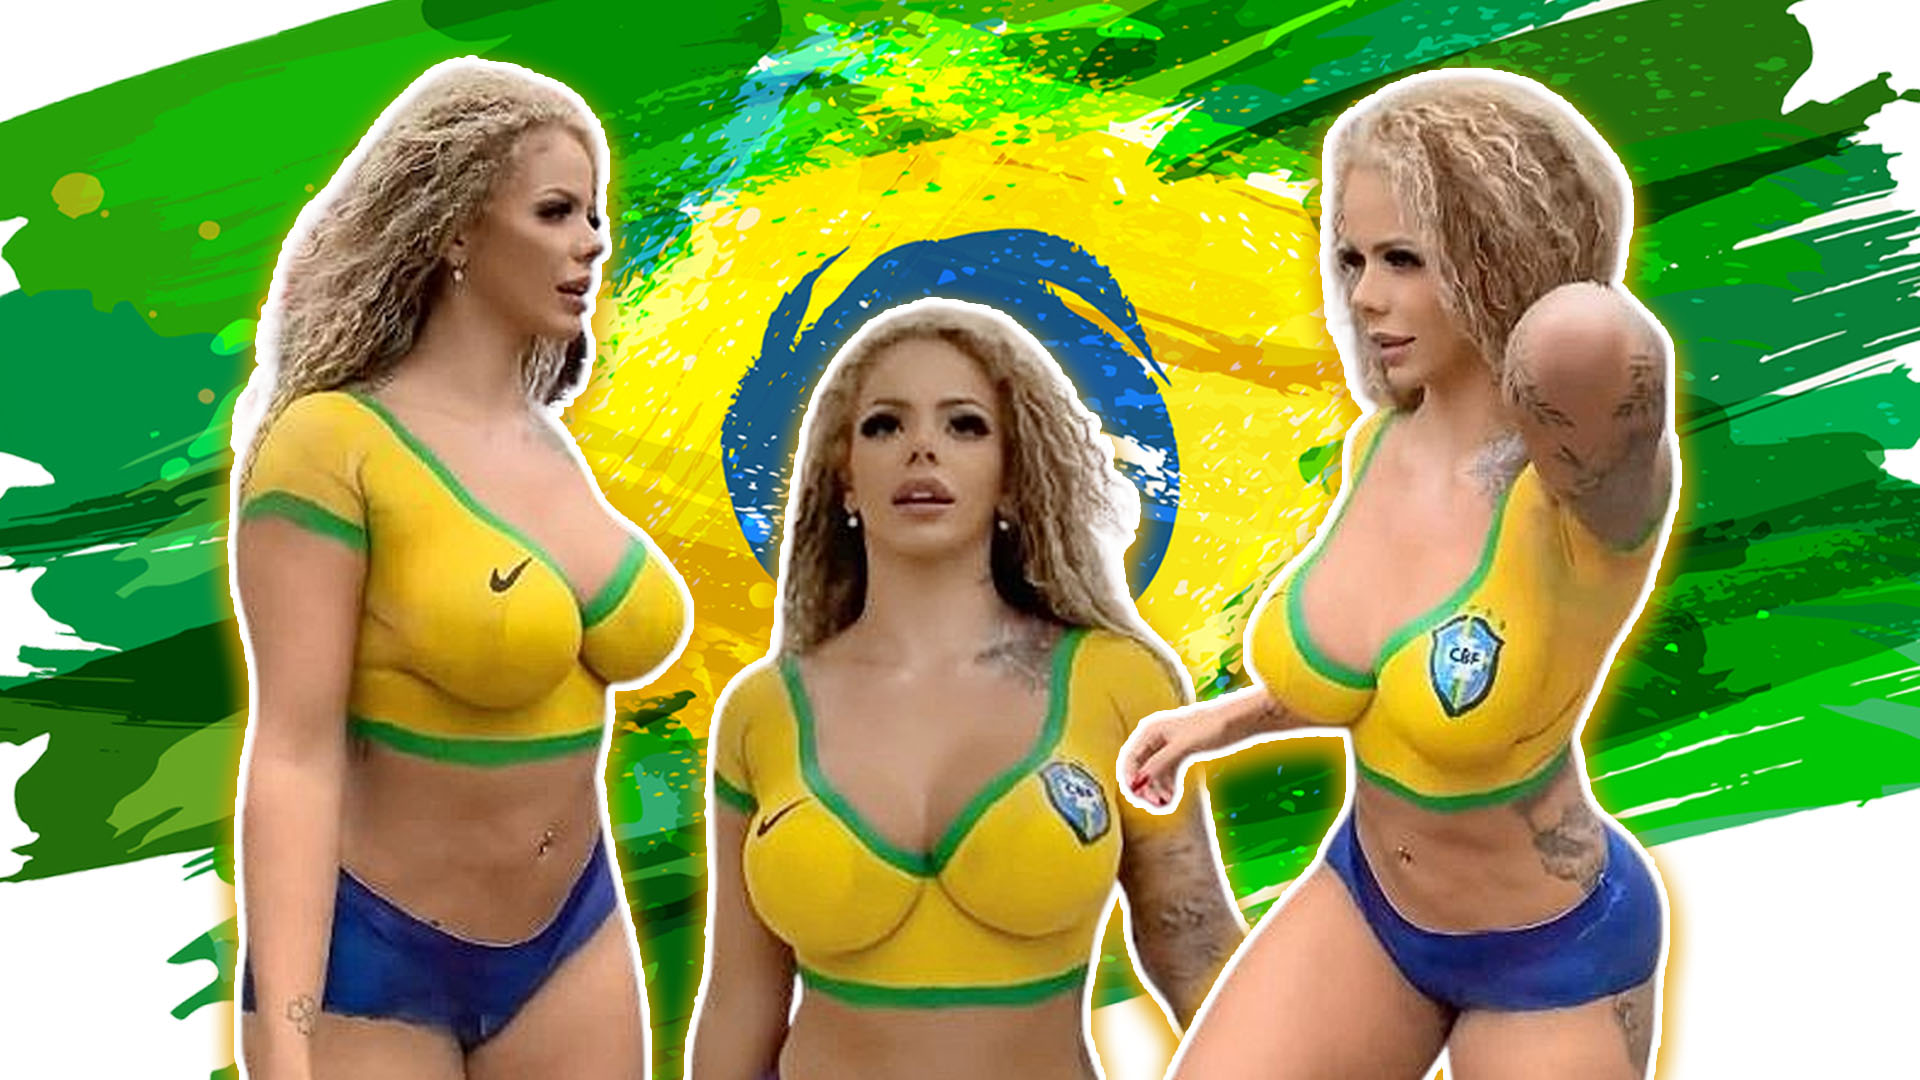 Shock moment Brazil-loving OnlyFans model gets on tube wearing NOTHING with just body paint to cover modesty [Video]